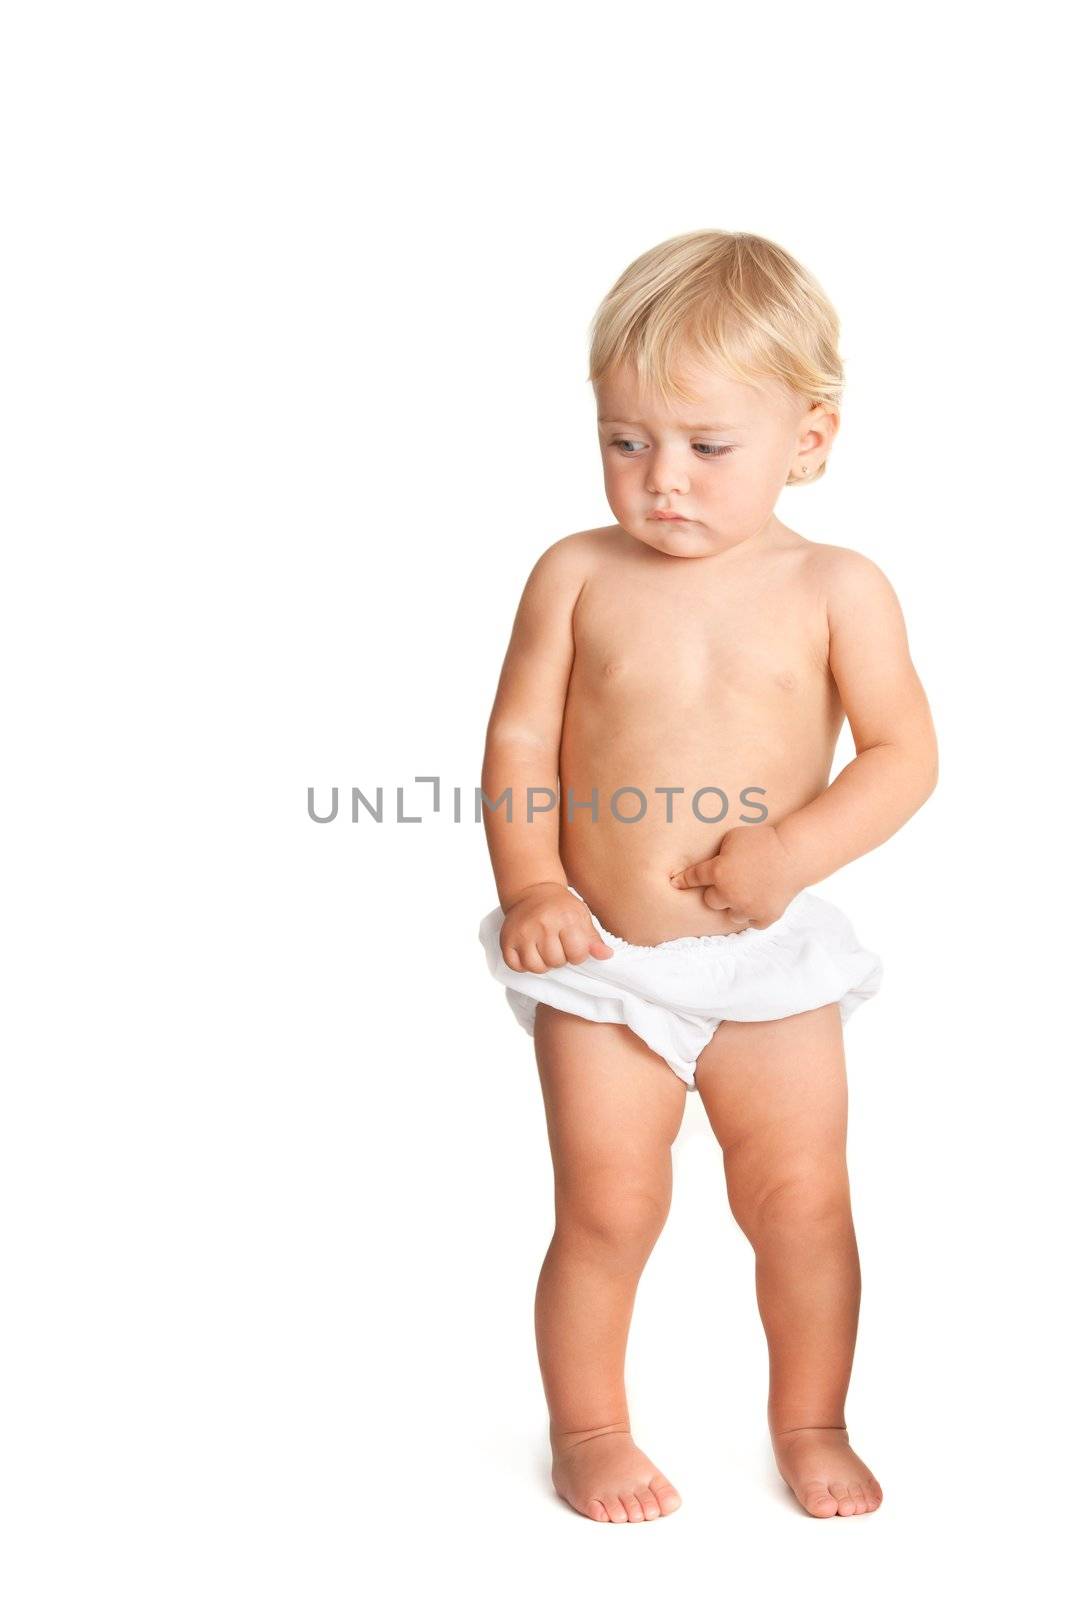 Portrait of full length baby girl with odd face expression pointing with hand on tummy. Isolated on white background.